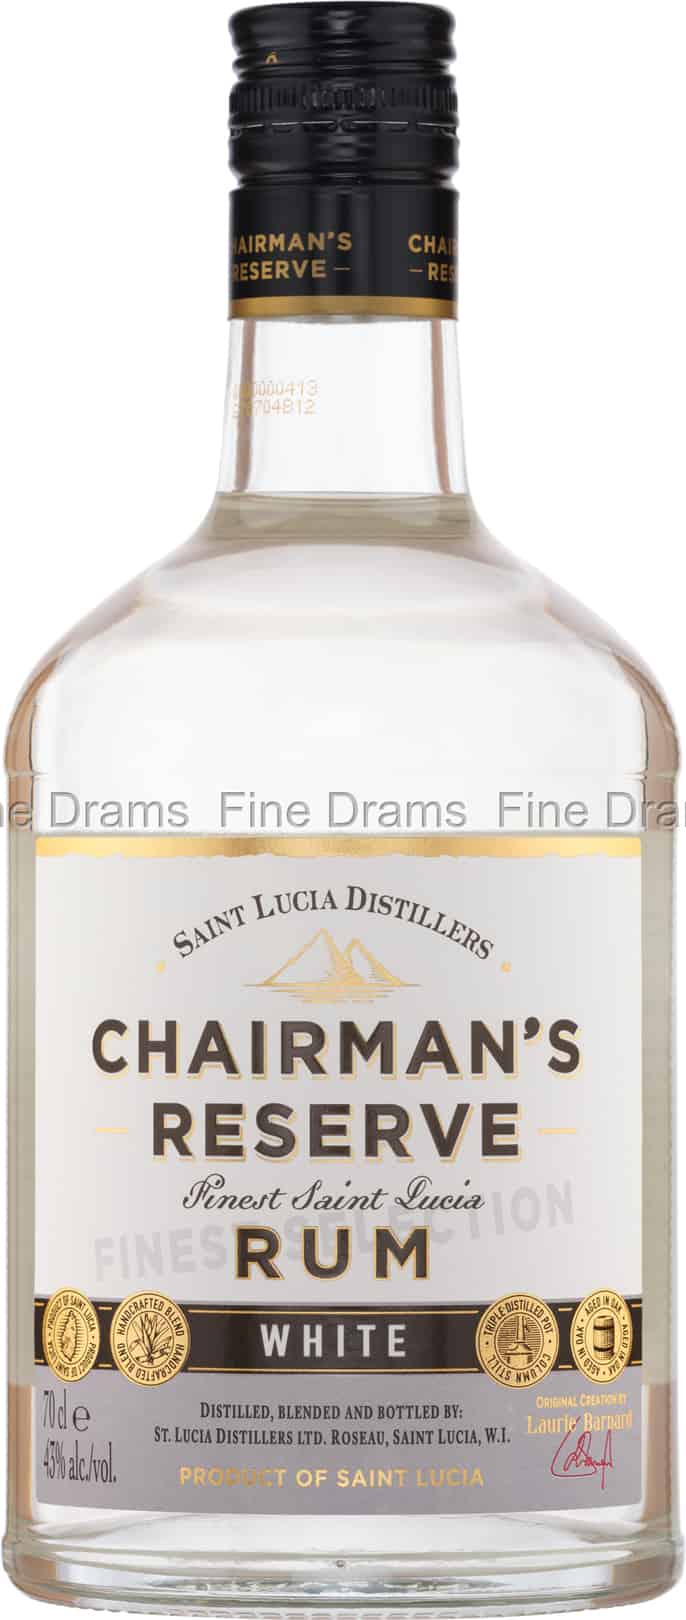 St. Lucia Chairman's Reserve White Rum